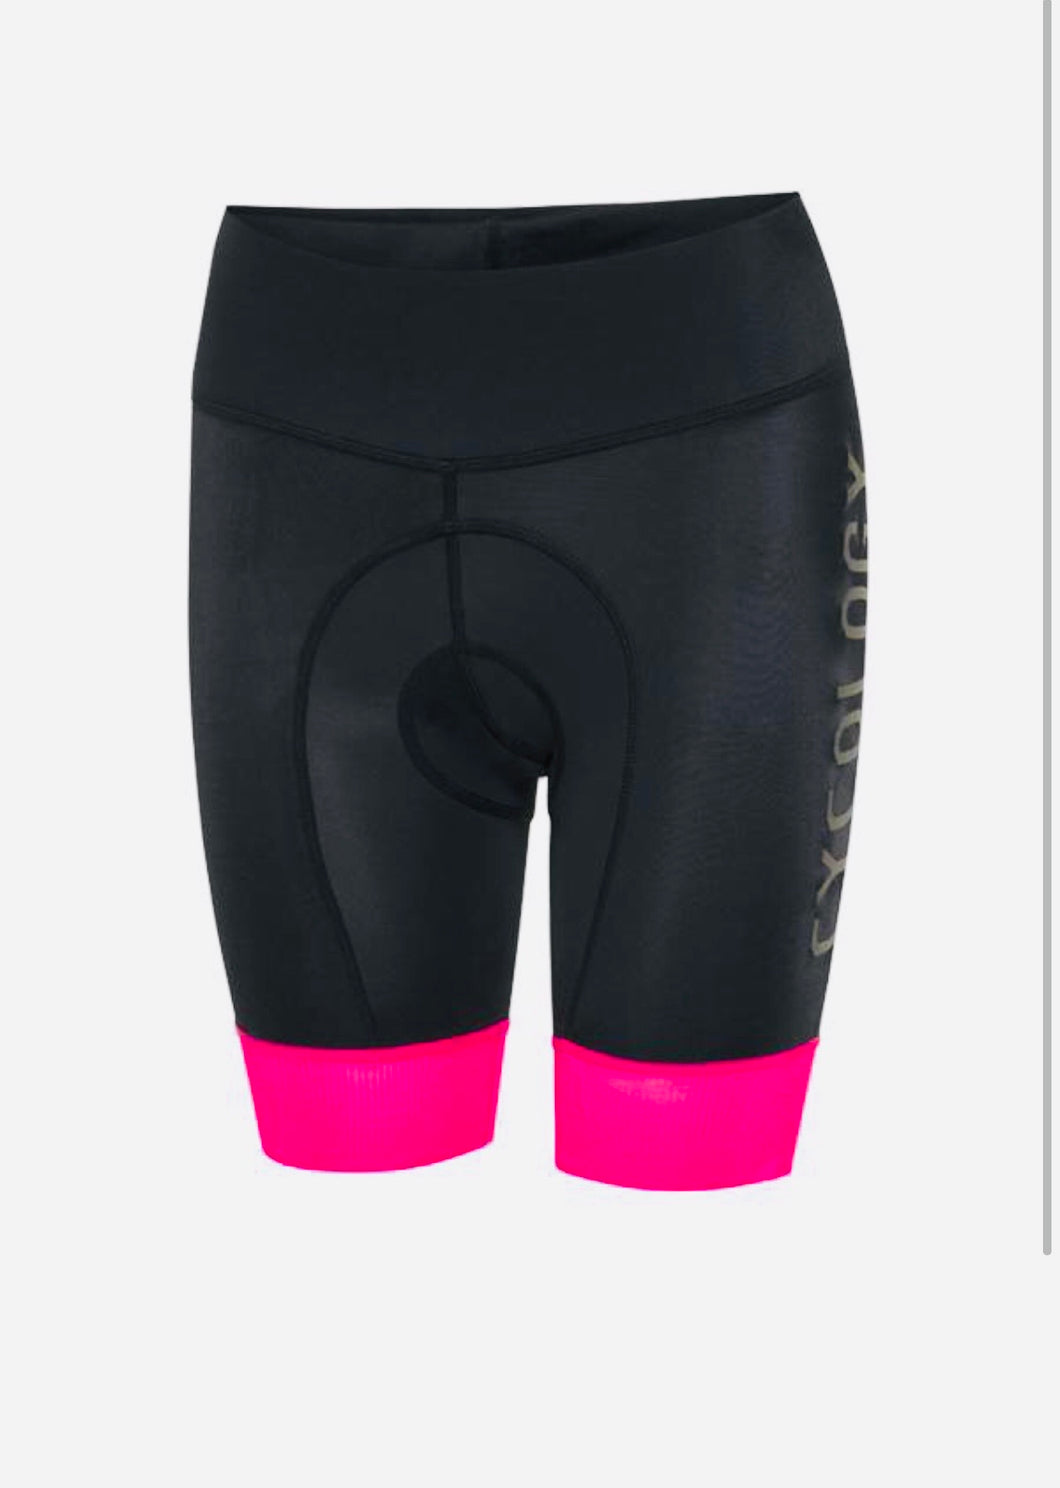 Cycology Quality Womens Cycling Shorts - Design Pink